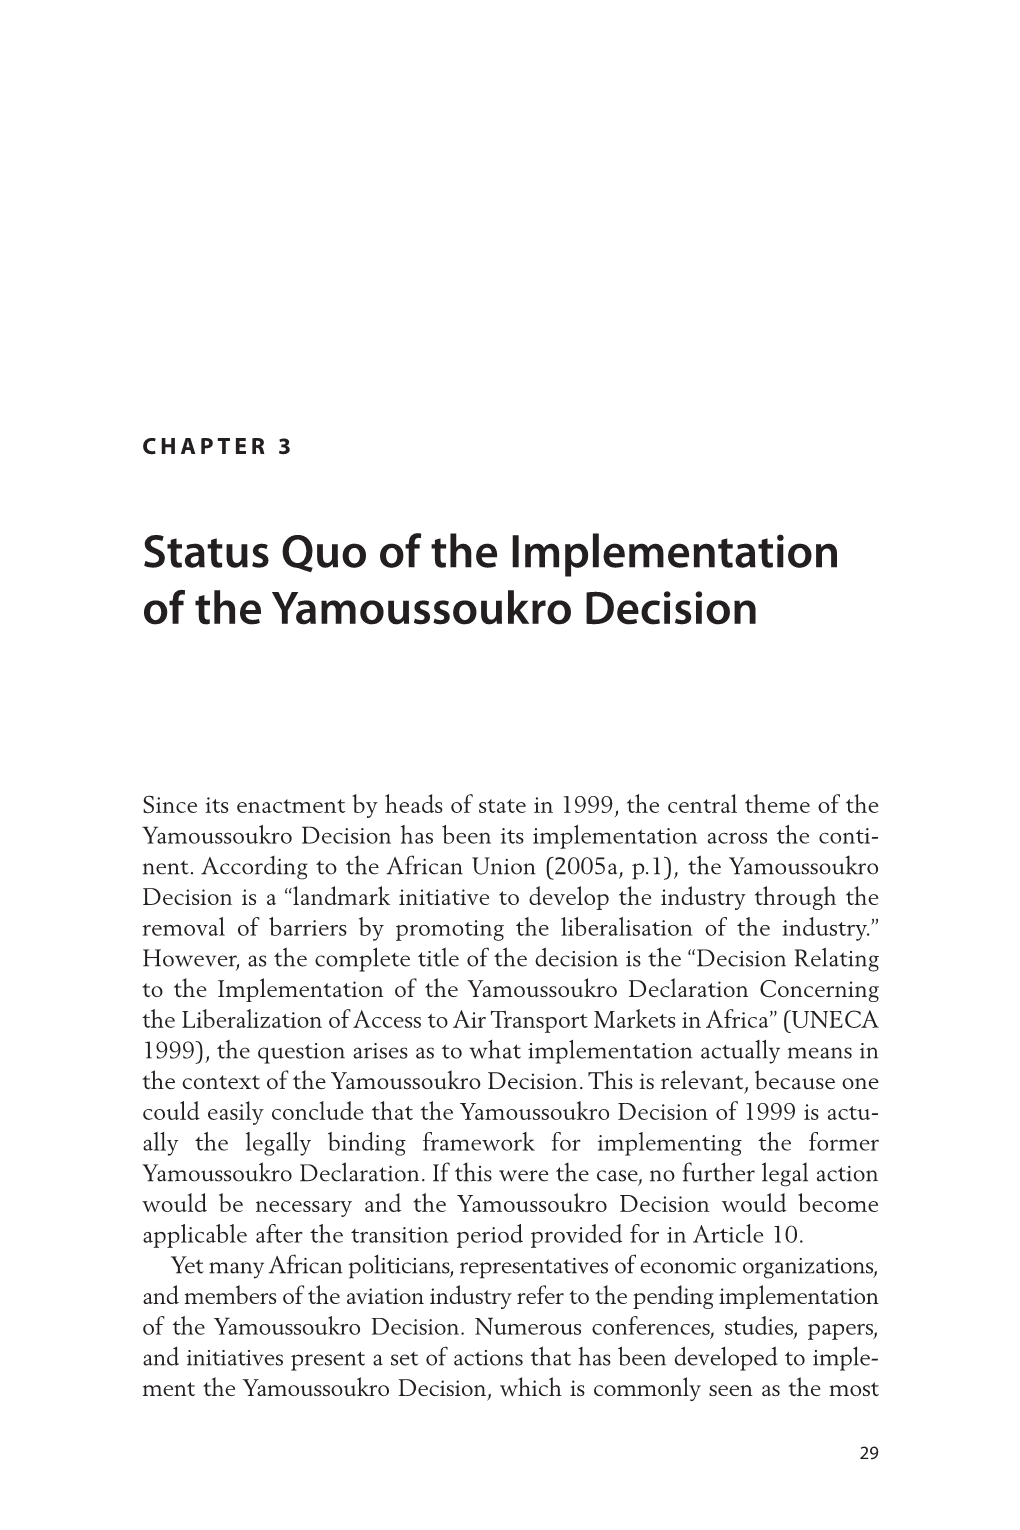 Status Quo of the Implementation of the Yamoussoukro Decision